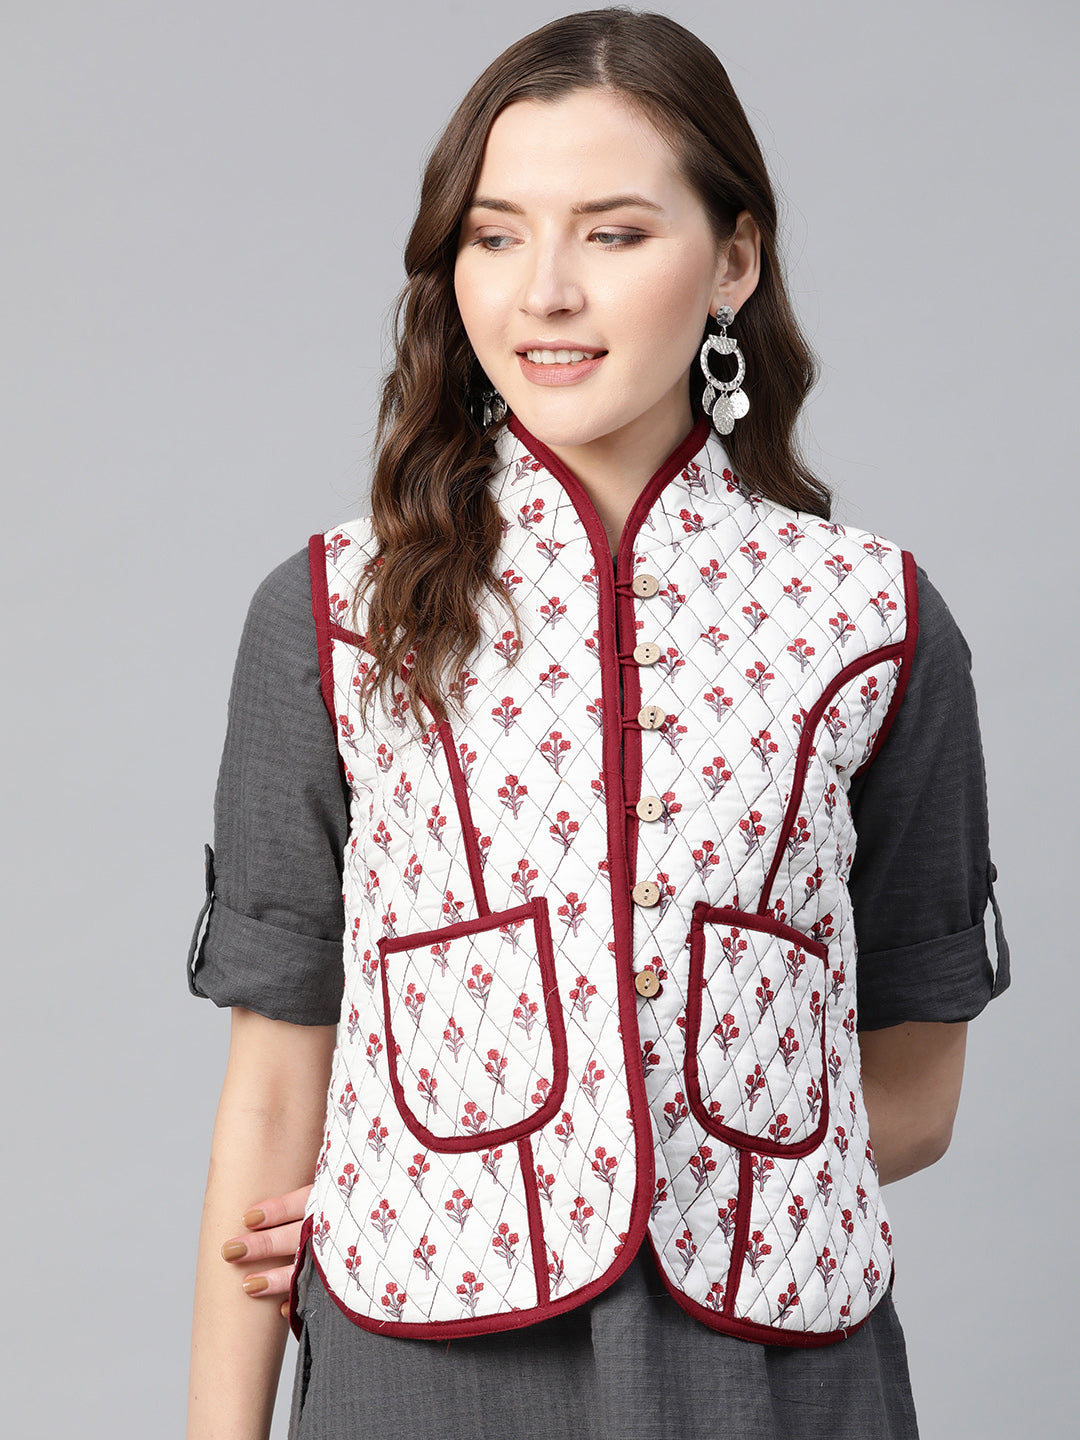 Quilted Jacket In Printed Fabric, Has A White Lining And Mehroon Piping Detailing On Collar And Pocket,Has 2 Pockets And Mandarin Collor